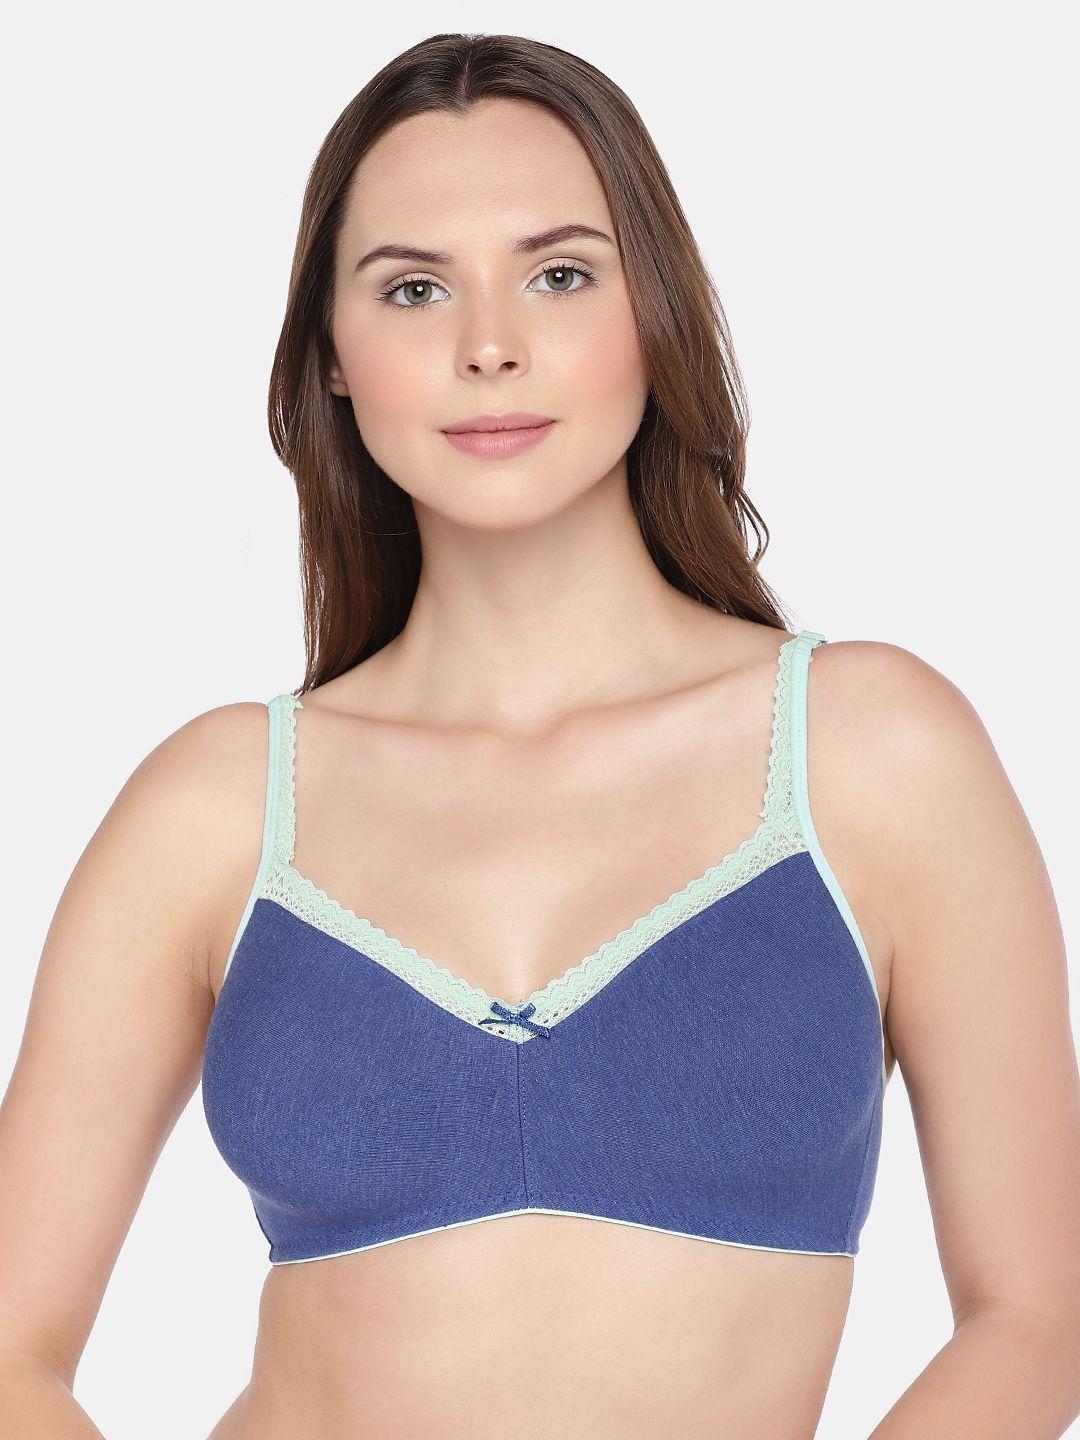 inner-sense-organic-cotton-antimicrobial-sustainable-soft-laced-bra-(royal-blue)-isb017a